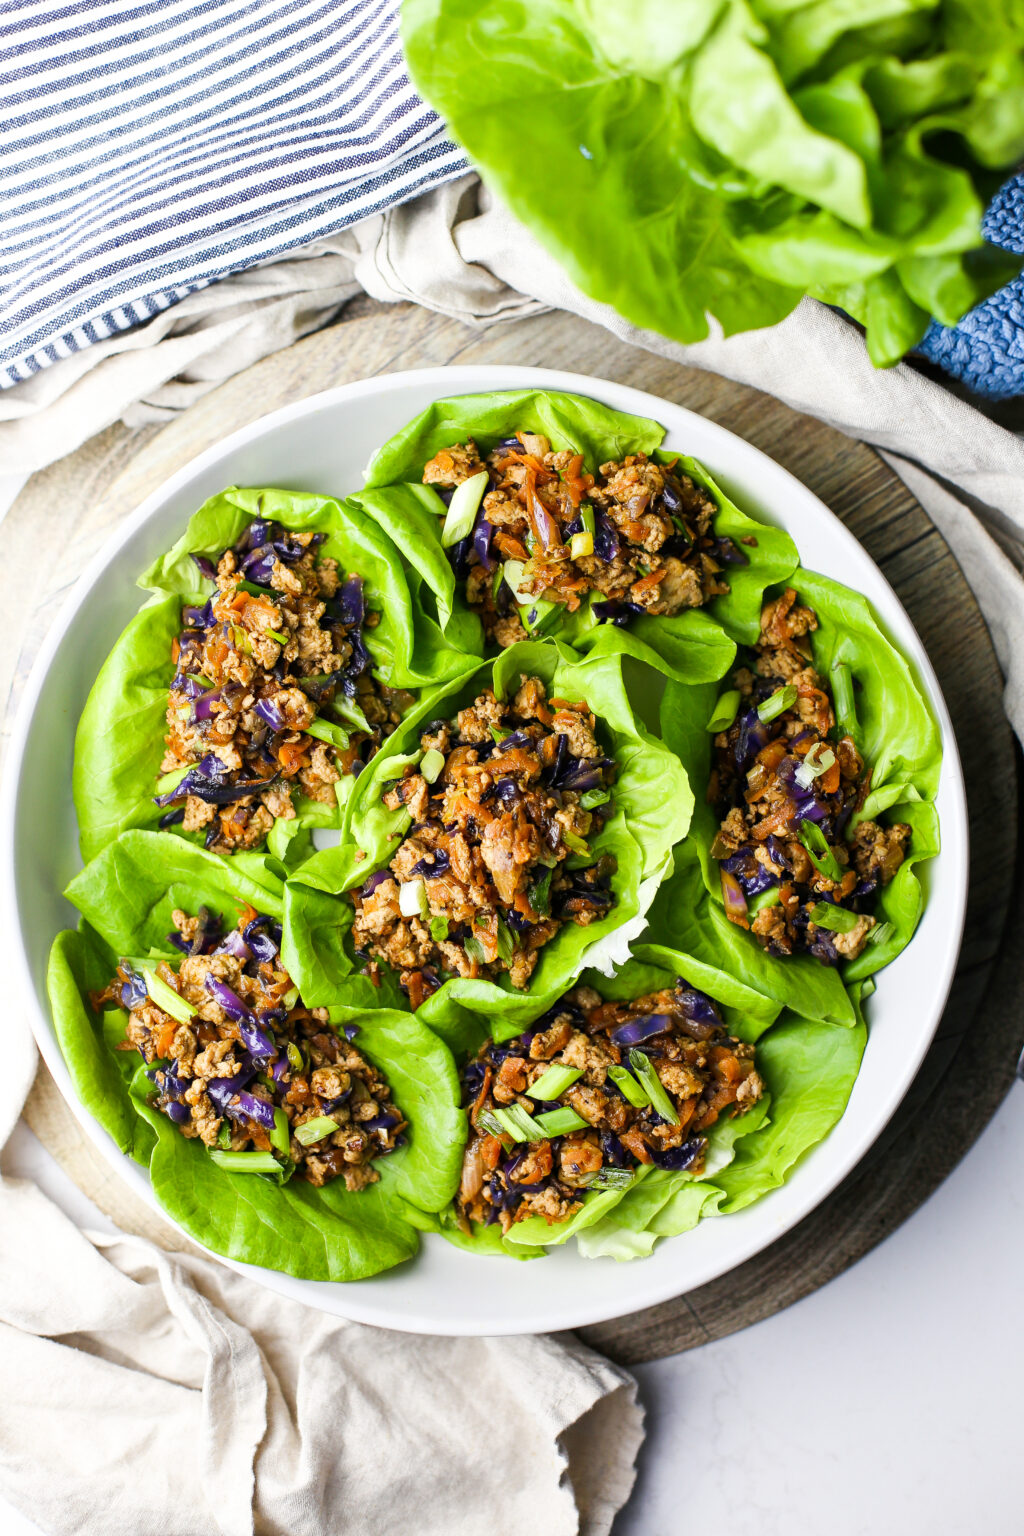 Ground Chicken Lettuce Wraps - Yay! For Food